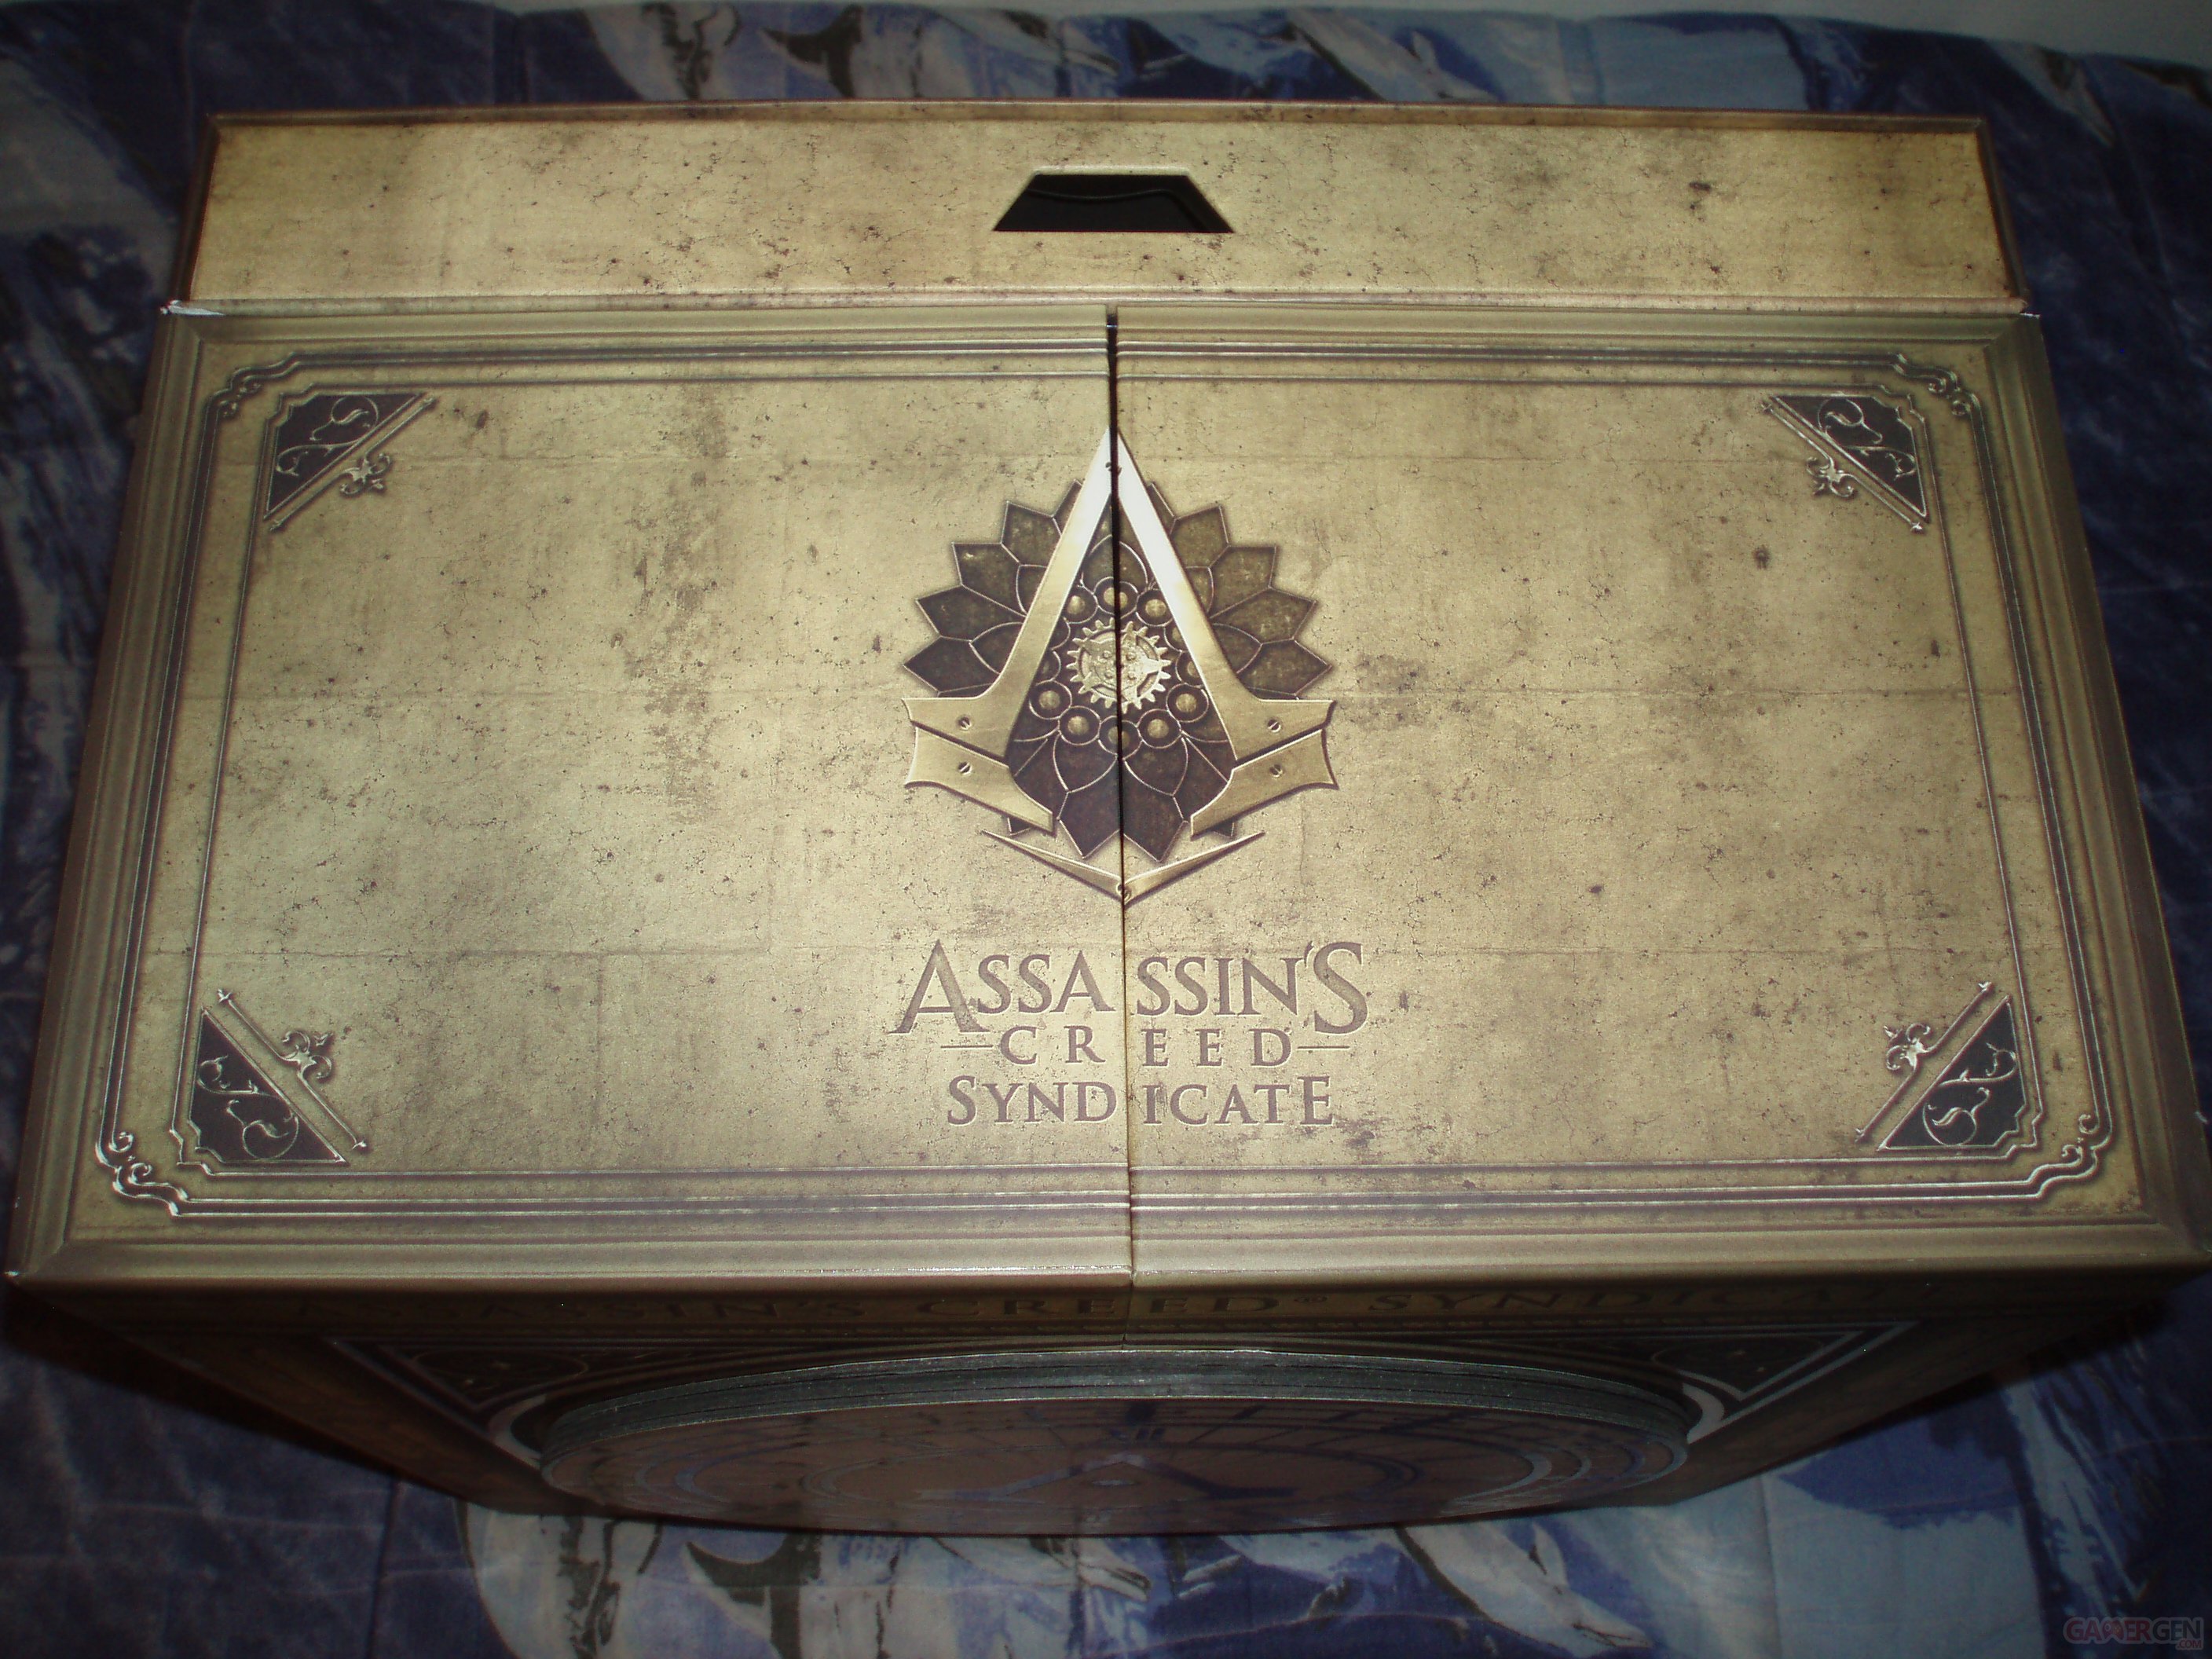 Unboxing Assassin S Creed Syndicate Les Collectors Rooks Edition Et